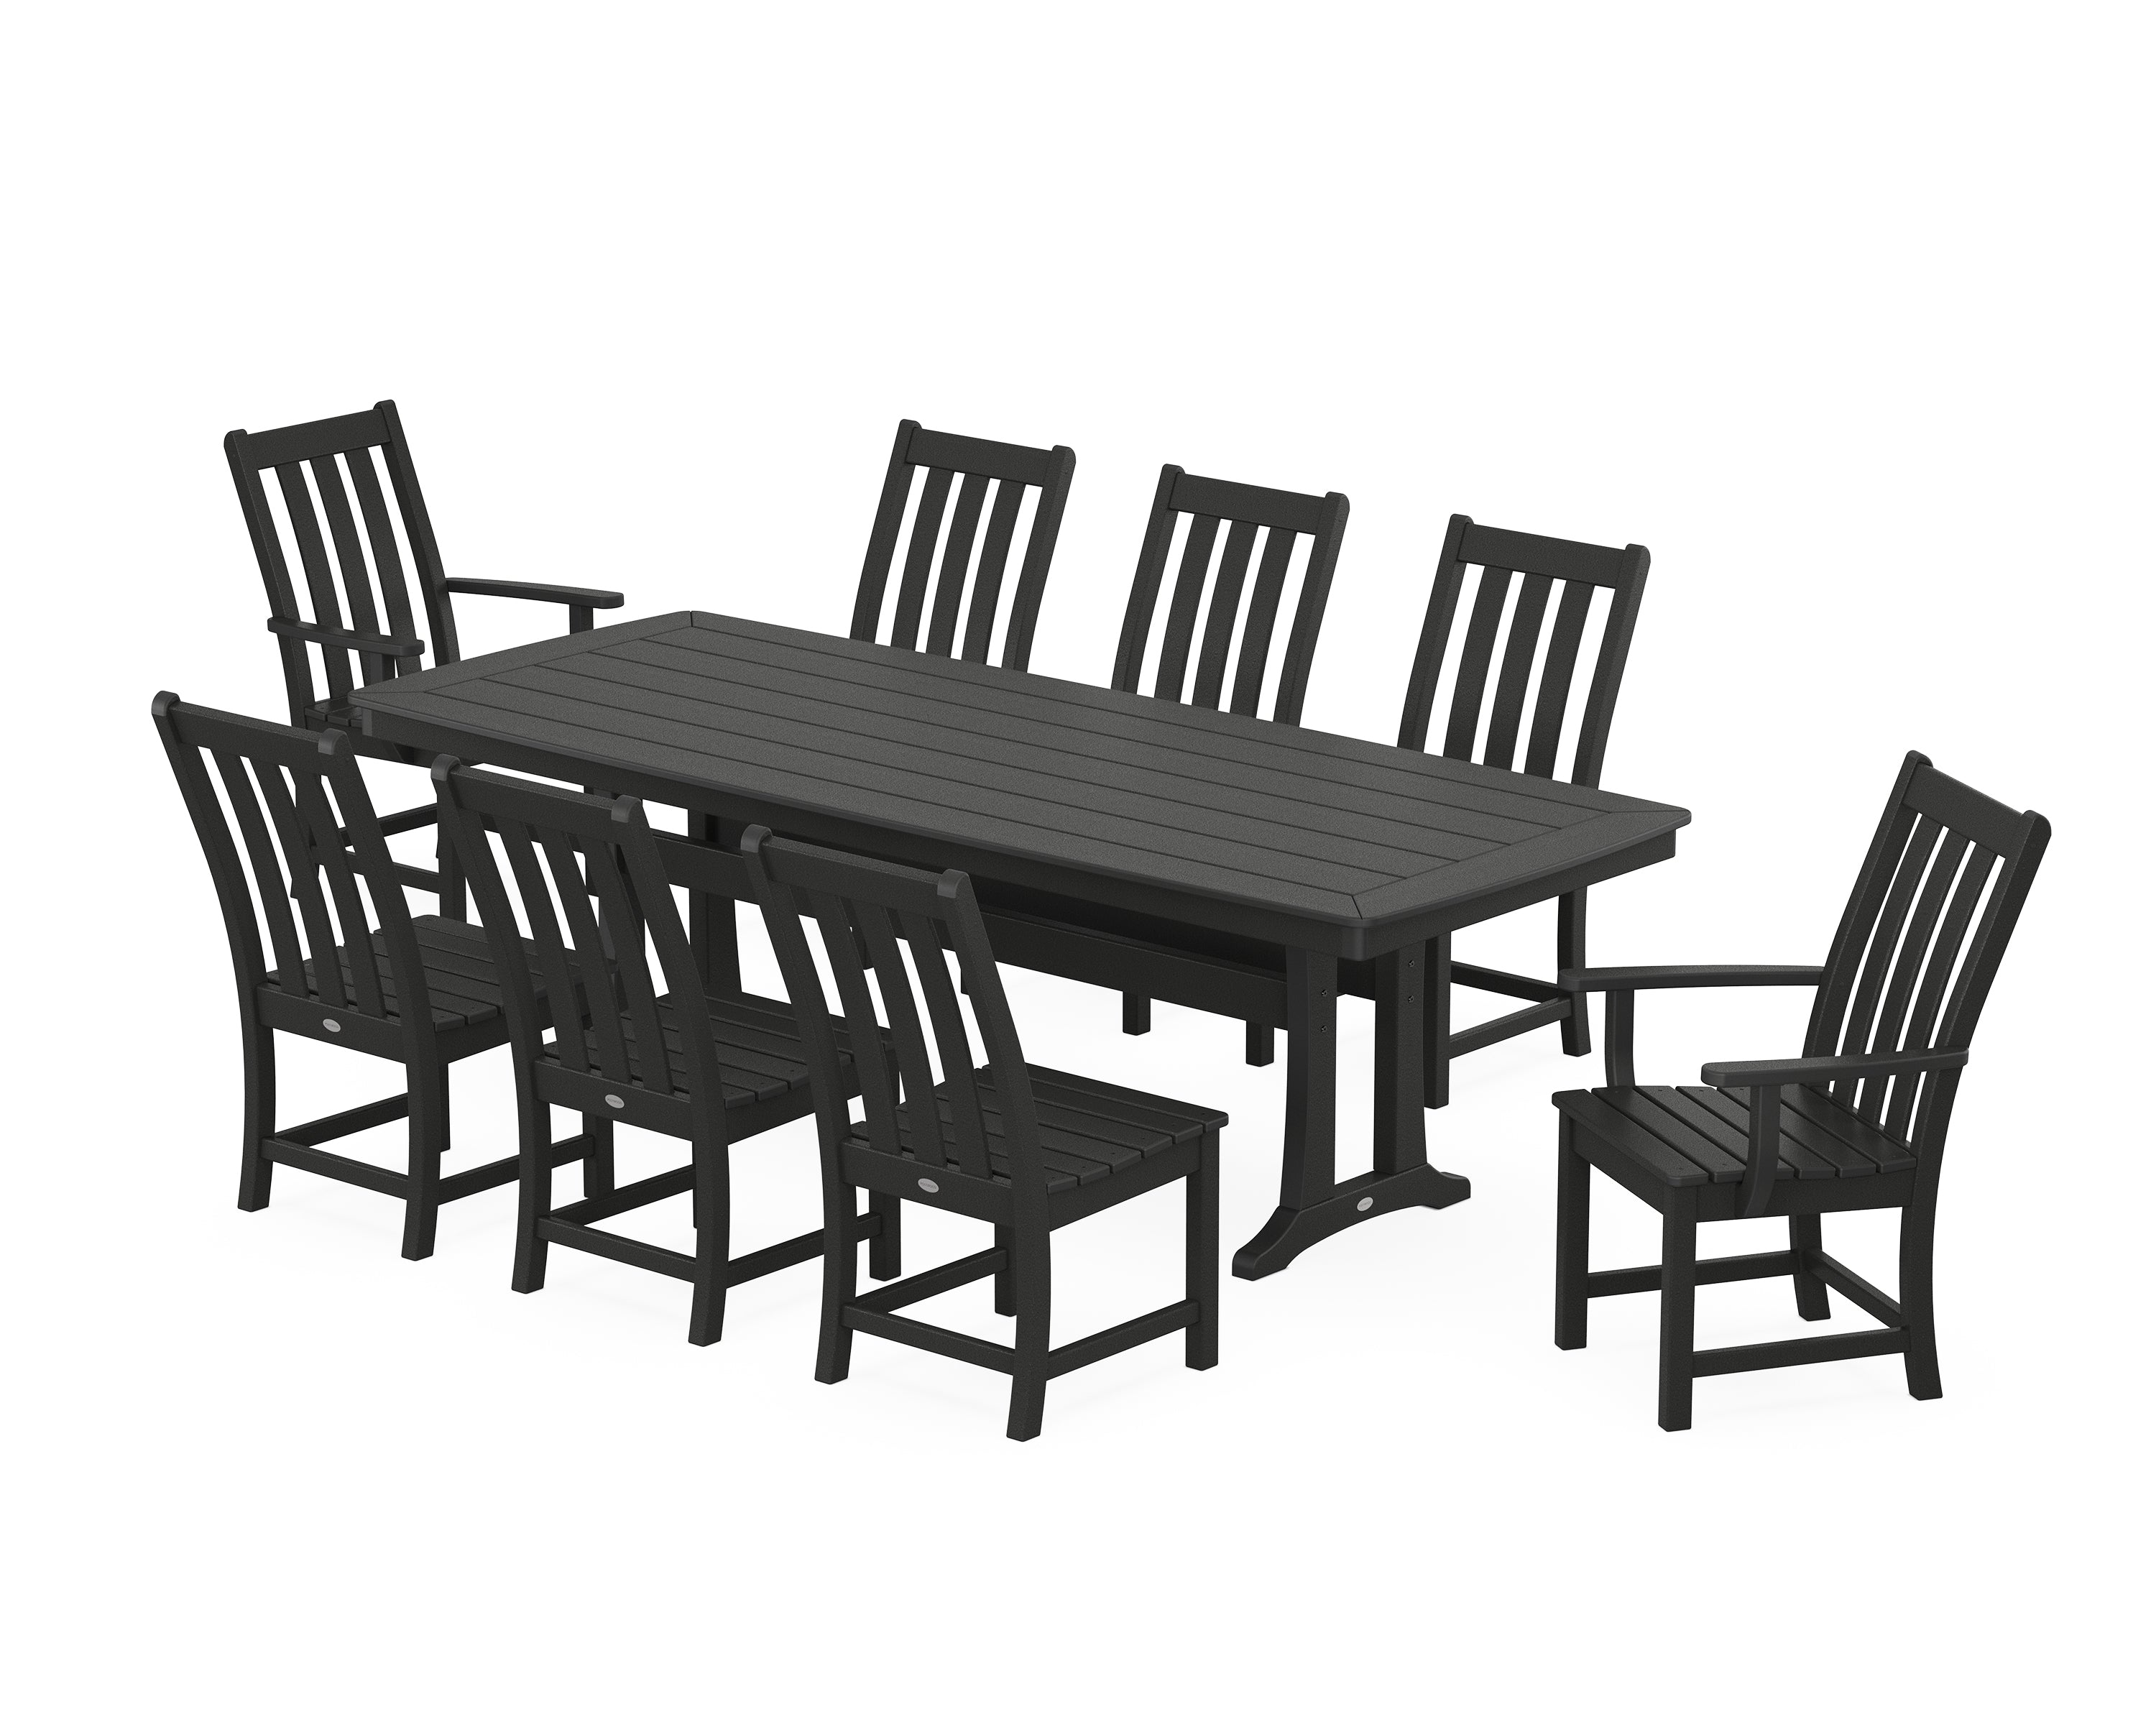 POLYWOOD® Vineyard 9-Piece Dining Set with Trestle Legs in Black